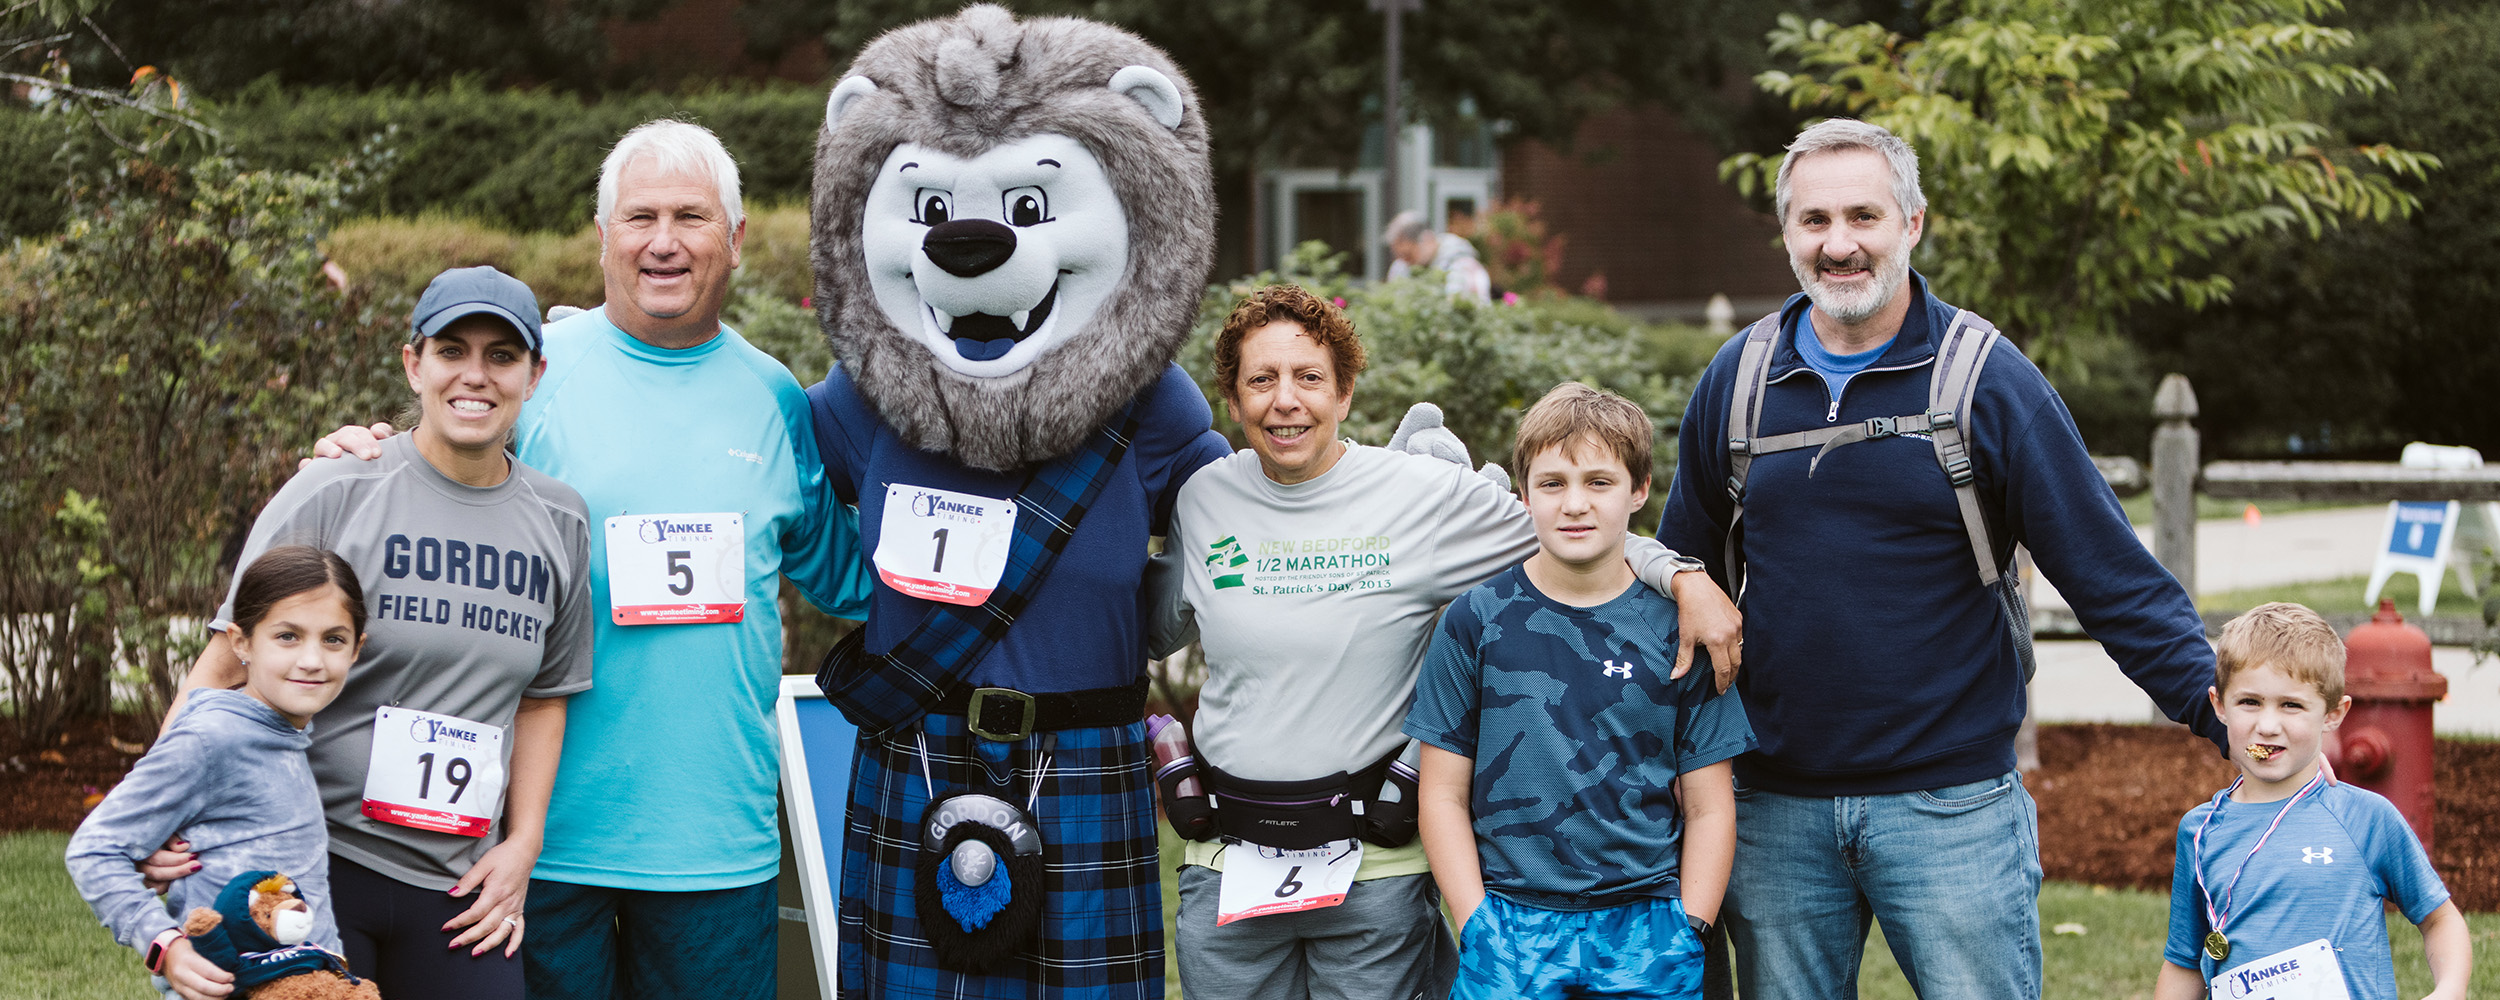 Scottie with a family at the Scot Trot